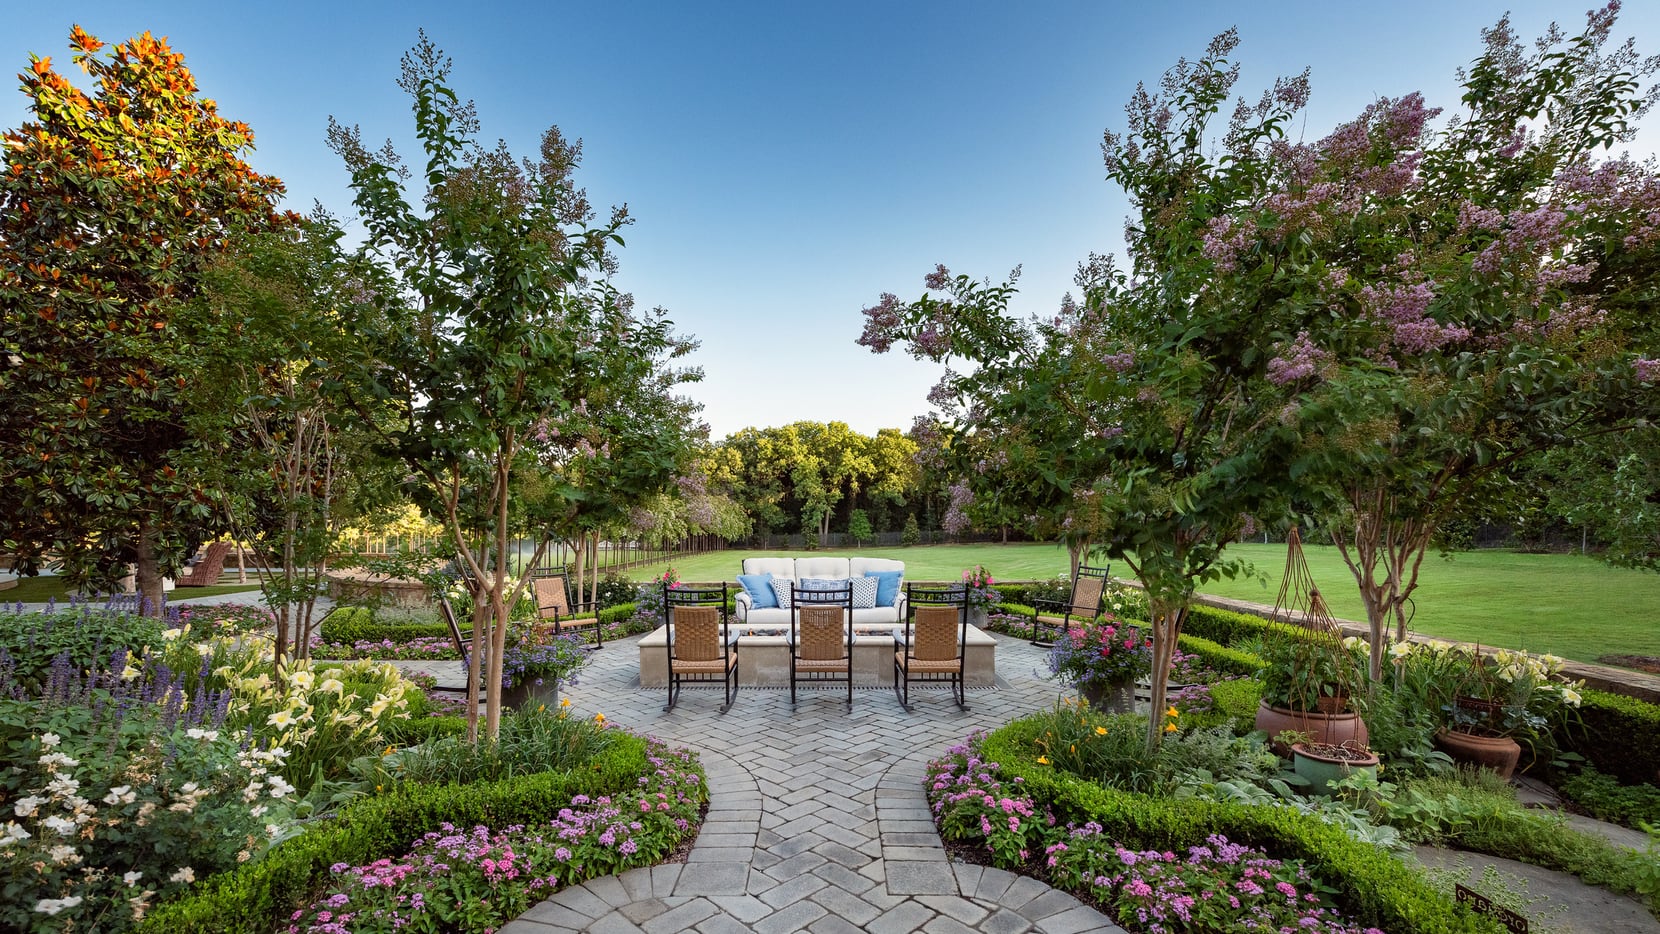 Formal garden with seating area